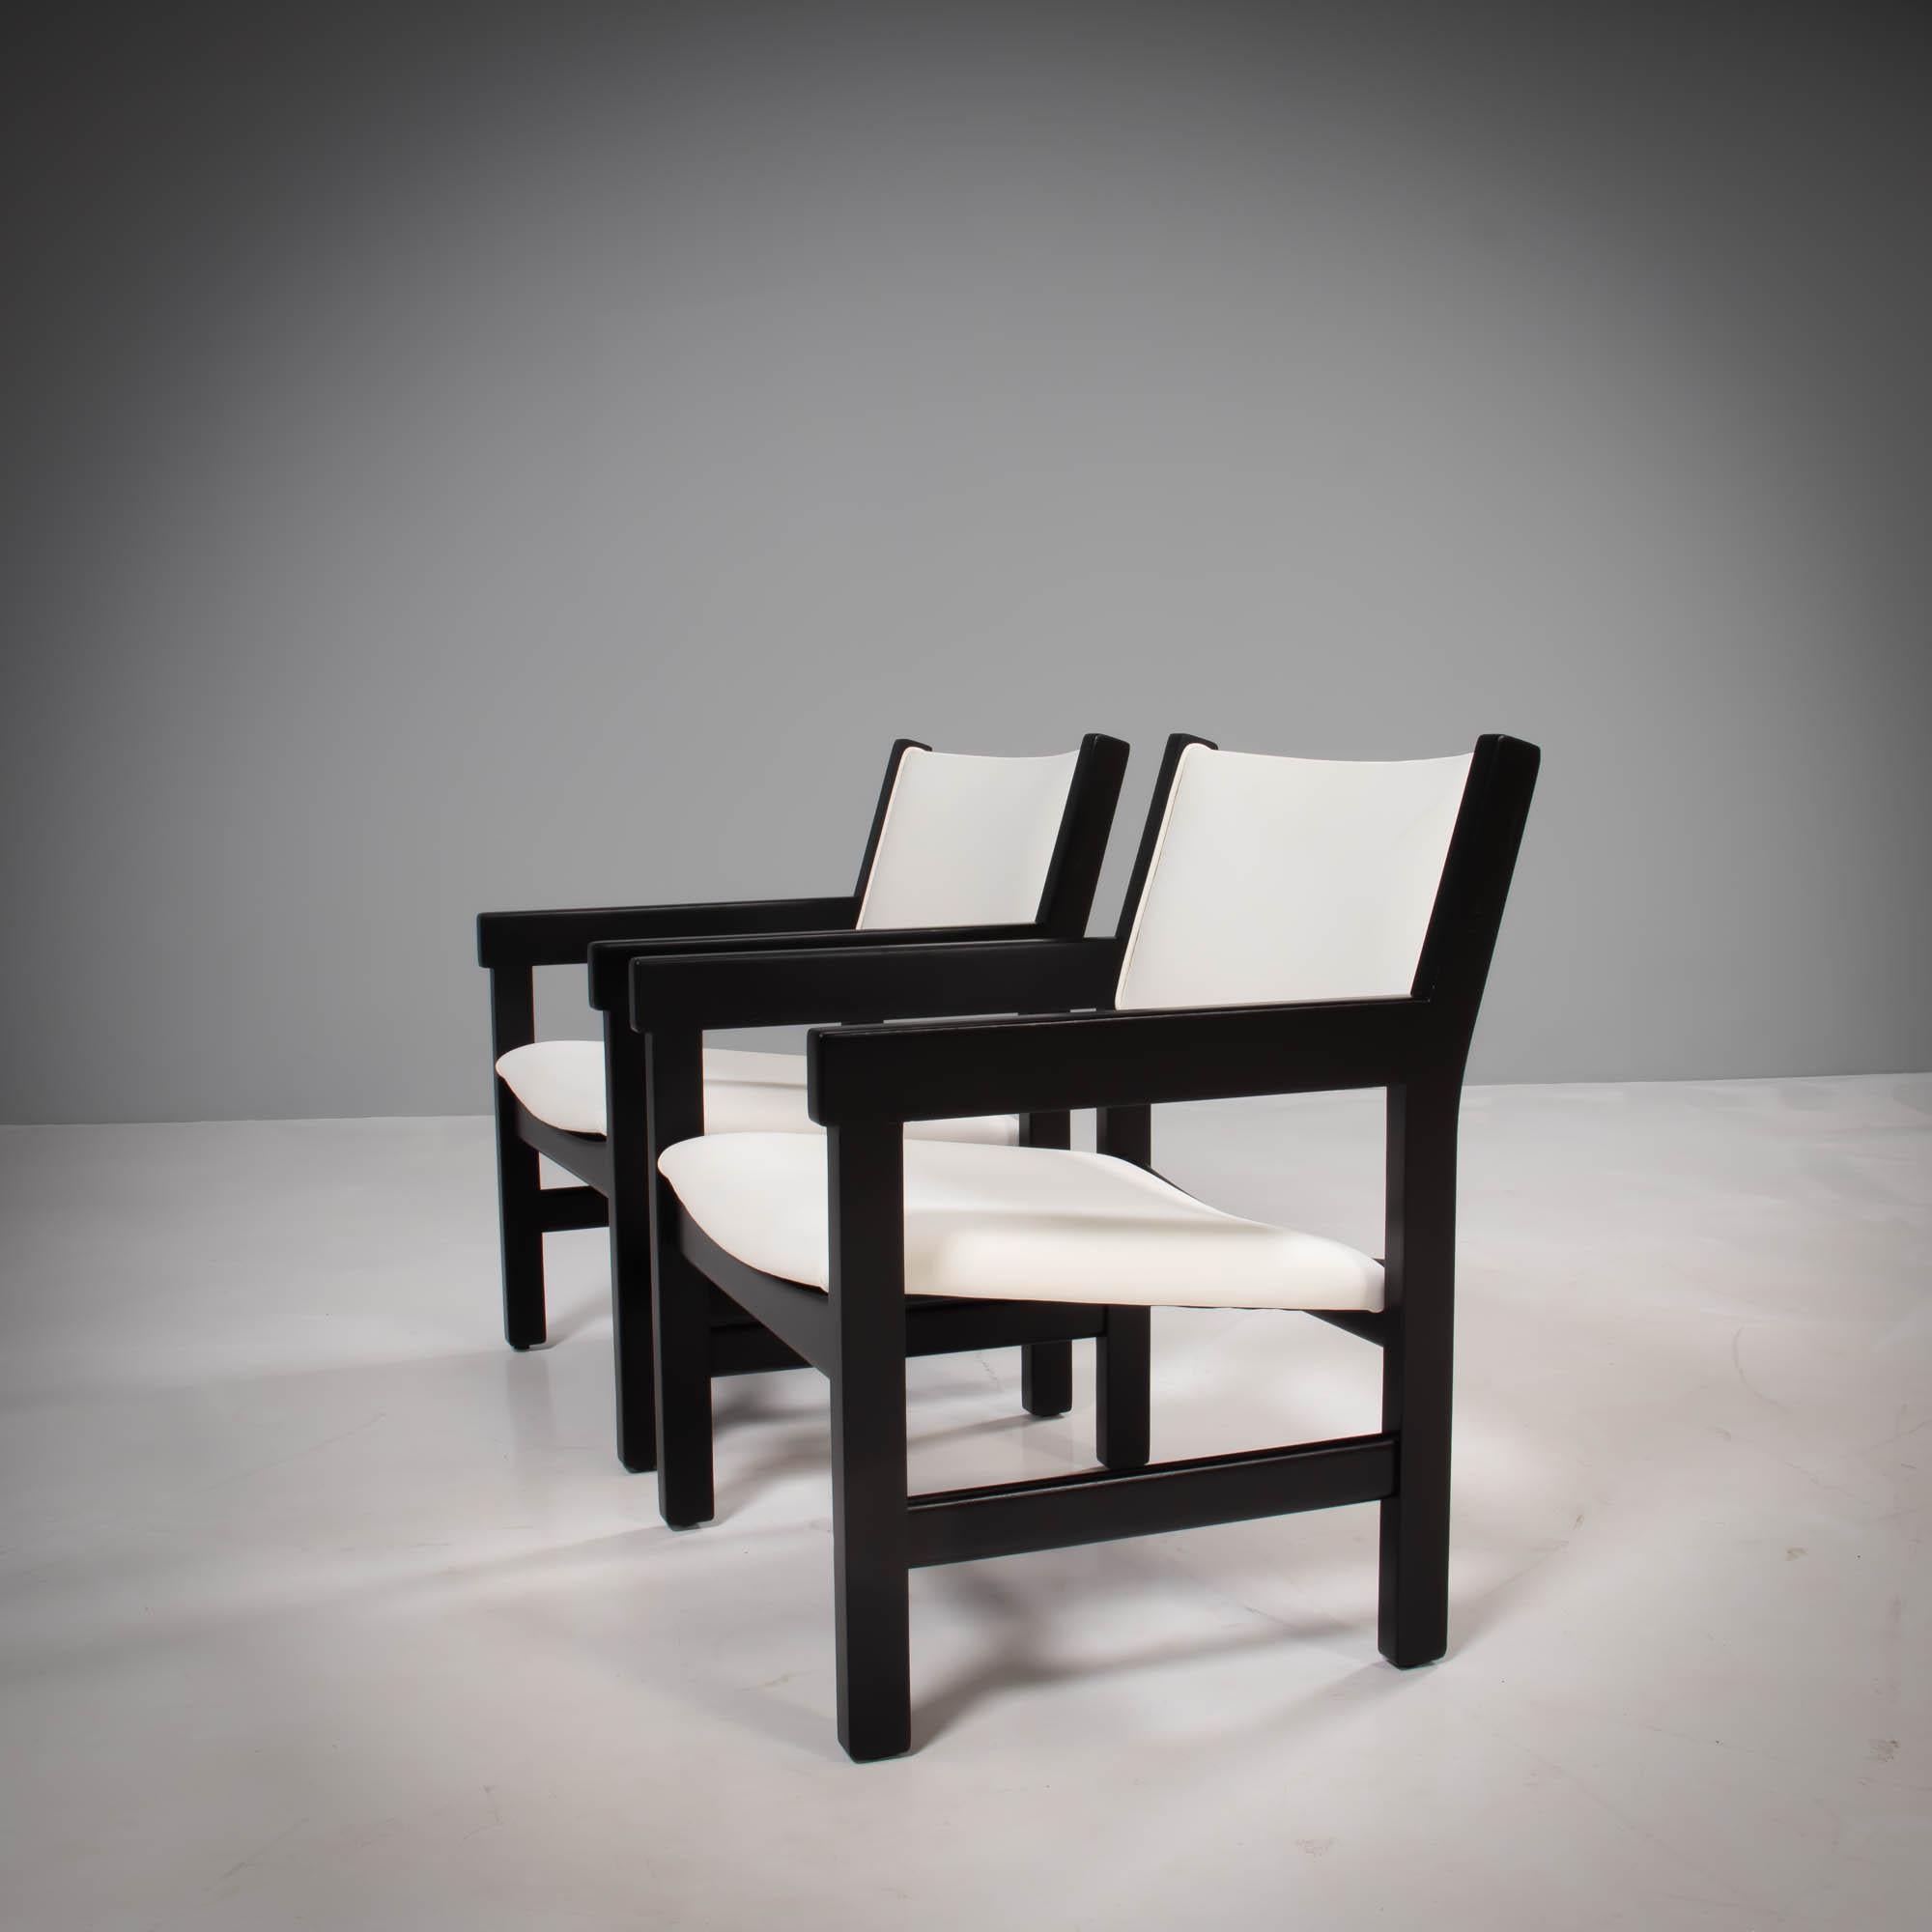 Designed by Hans J. Wegner for GETAMA, this set of GE 151 armchairs are a Classic example of Mid-Century Modern design.

Featuring angular black painted beechwood frames and arms, the newly restored chairs have padded seats and backrests which